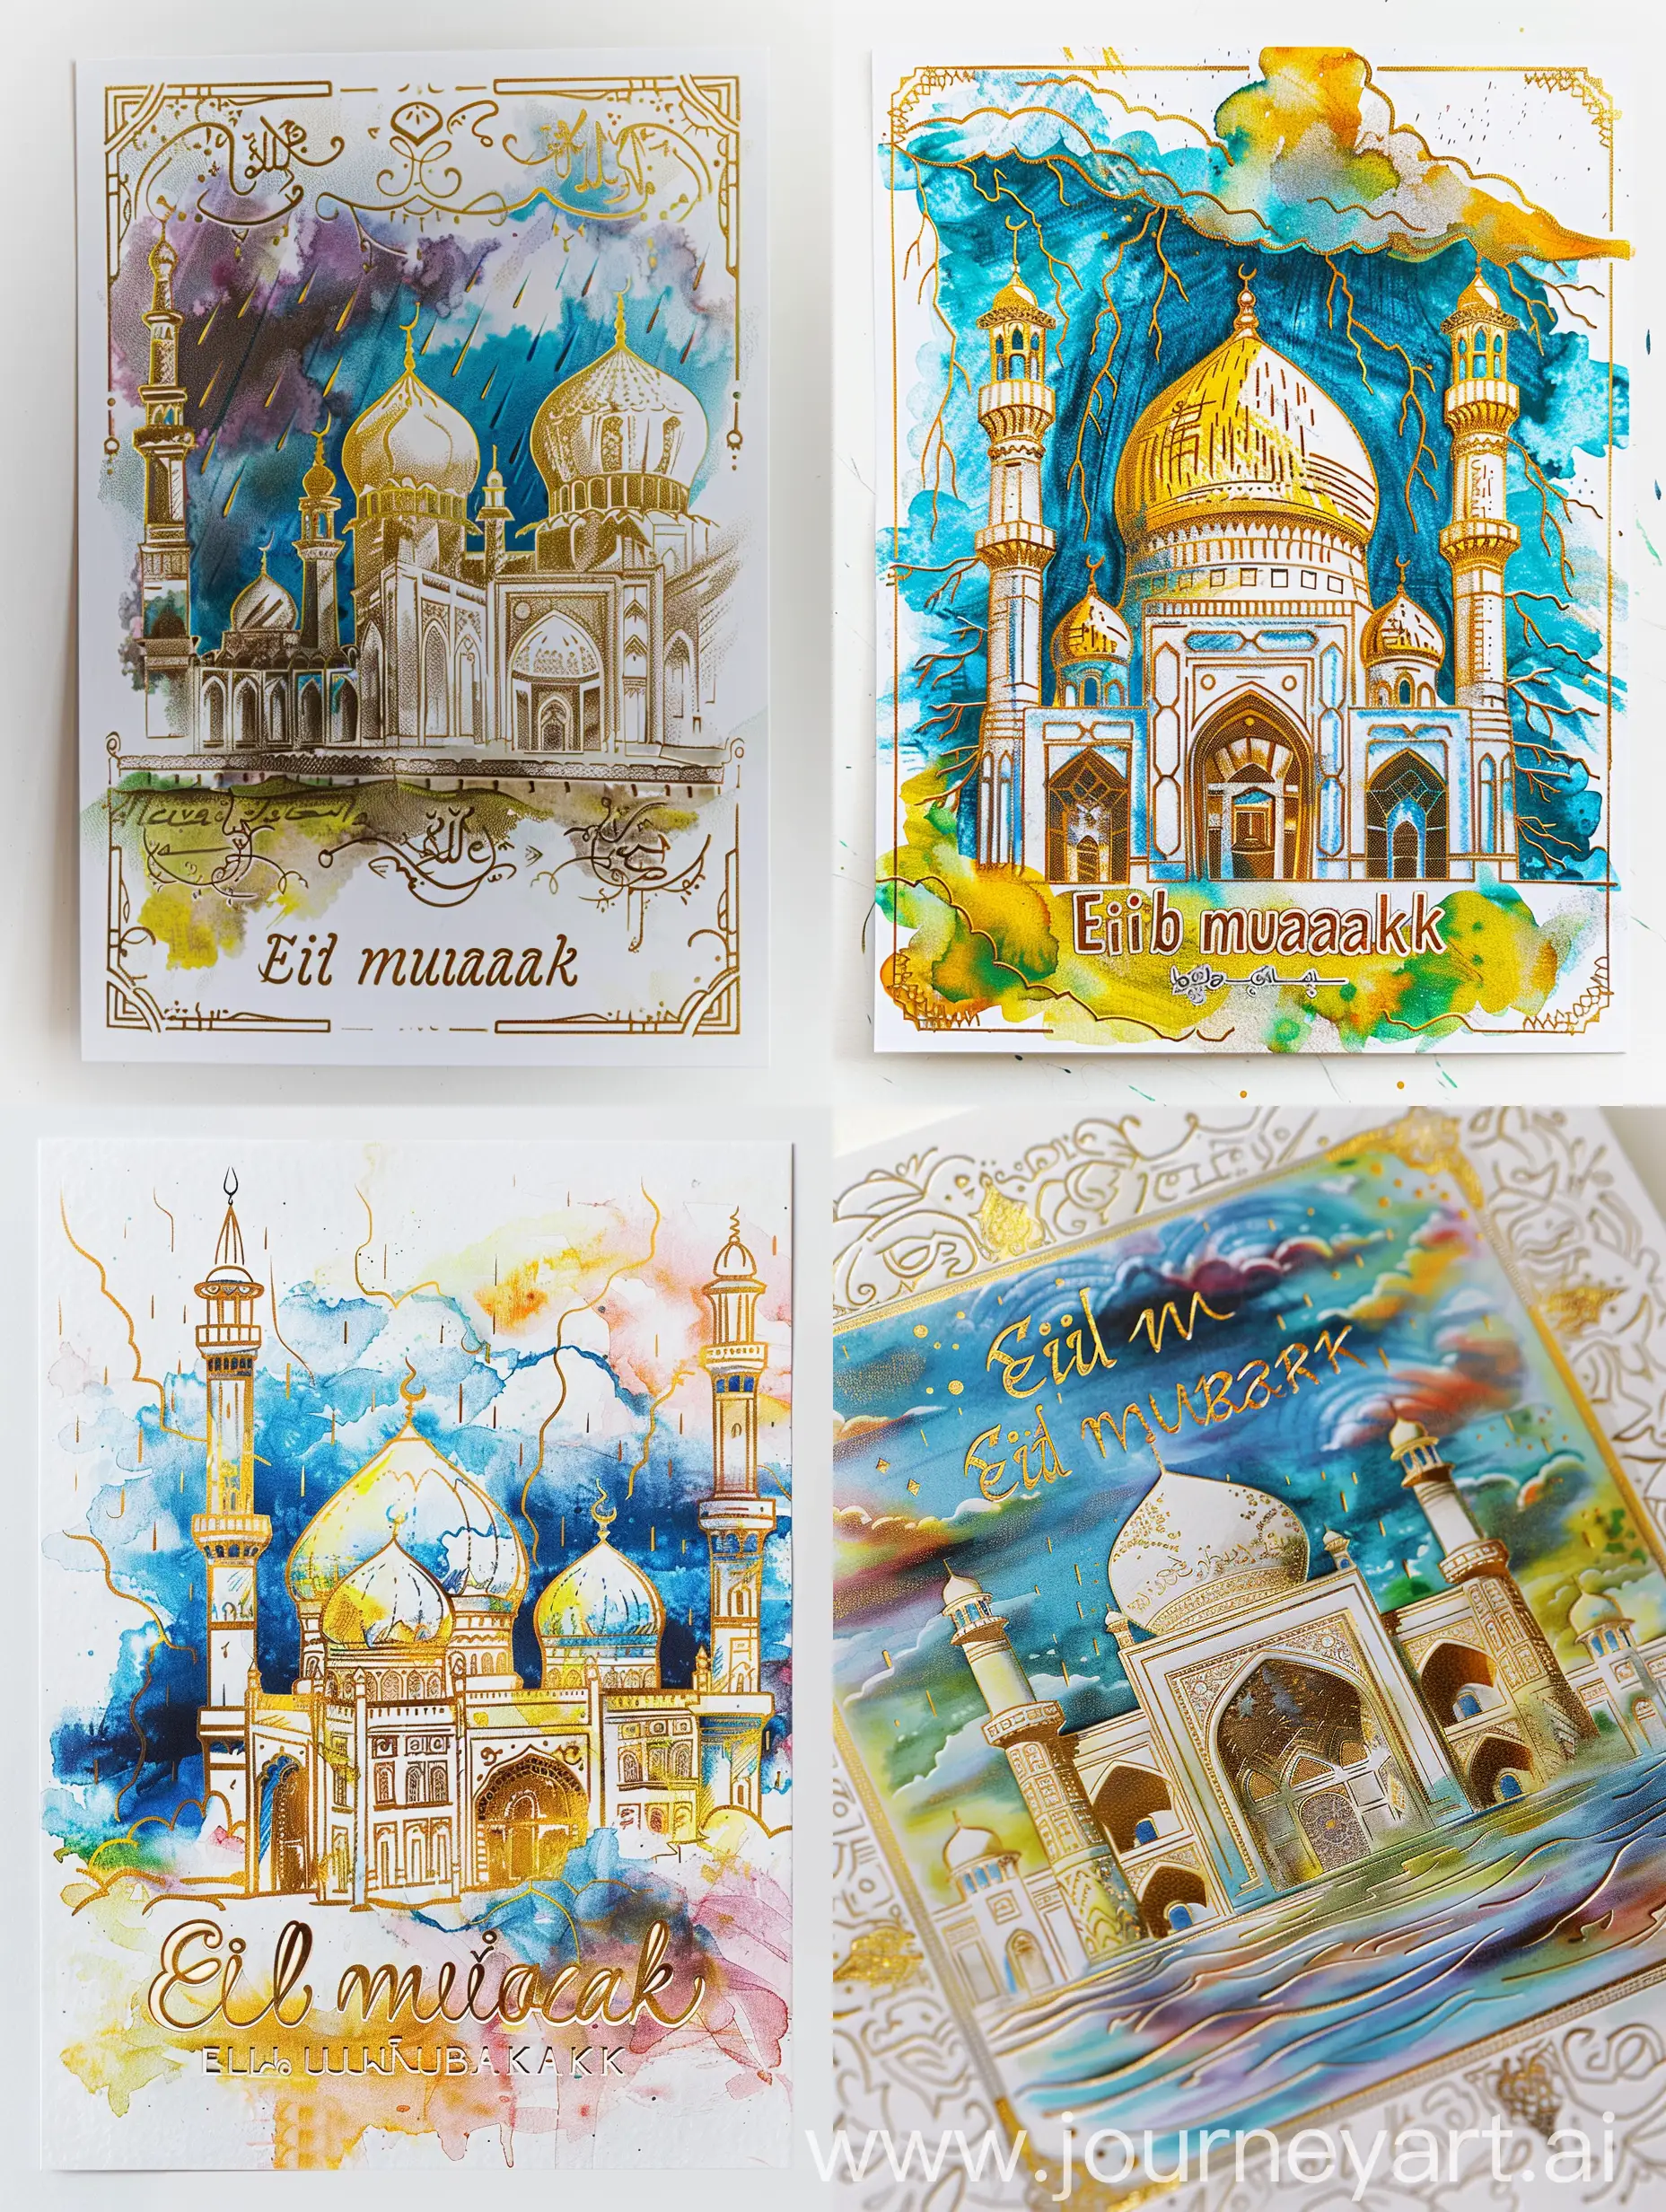 a greetings card, "Eid mubarak" written, engraved art depicting a persian mosque under thunder sky, watercolor and crayons style painting on white background, engraved golden outlines --ar 3:4